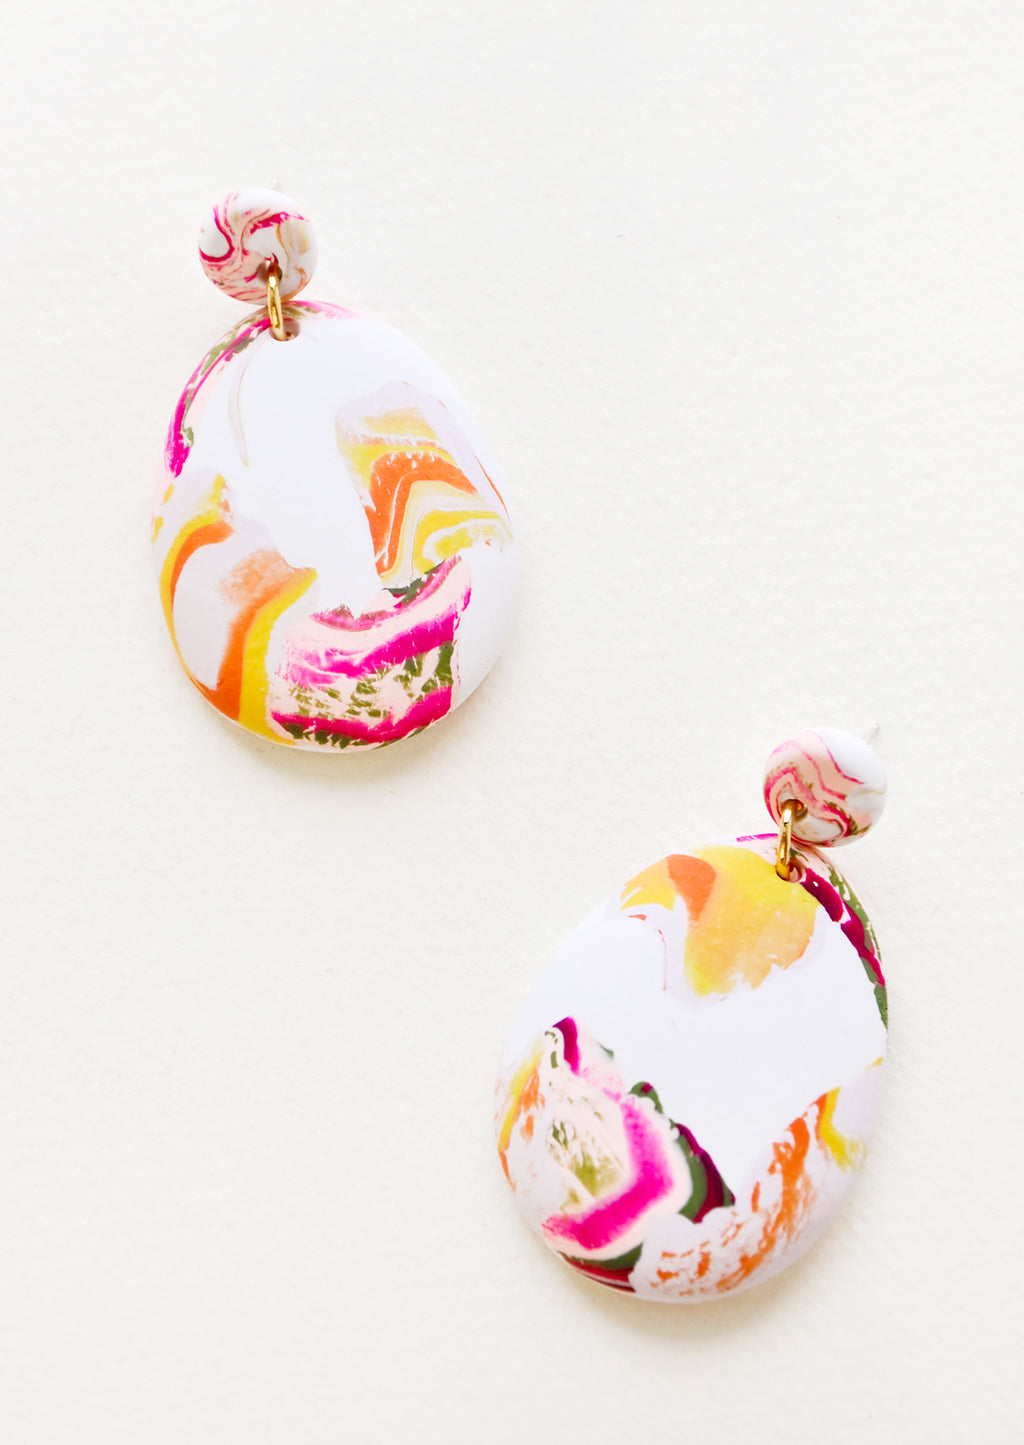 Sea Smoke: Pink, yellow, orange and white marbled clay earrings, with a larger oval dangling from a small circle.